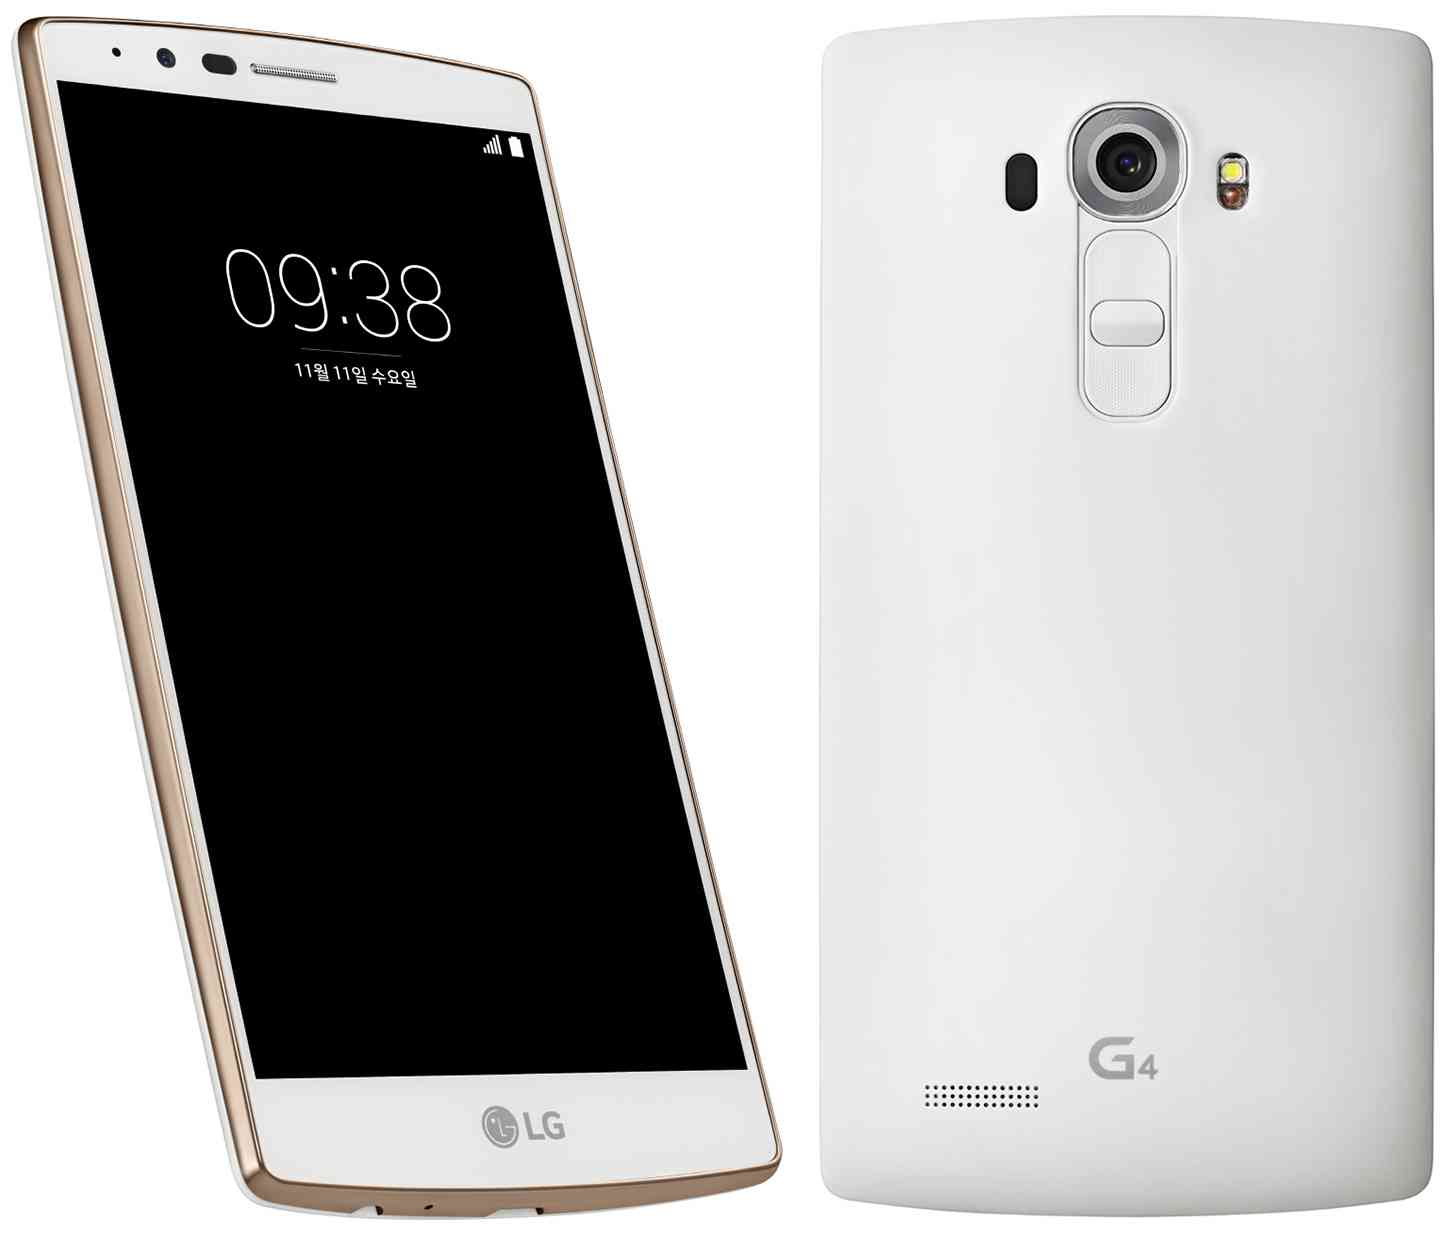 LG G4 White Gold Edition official